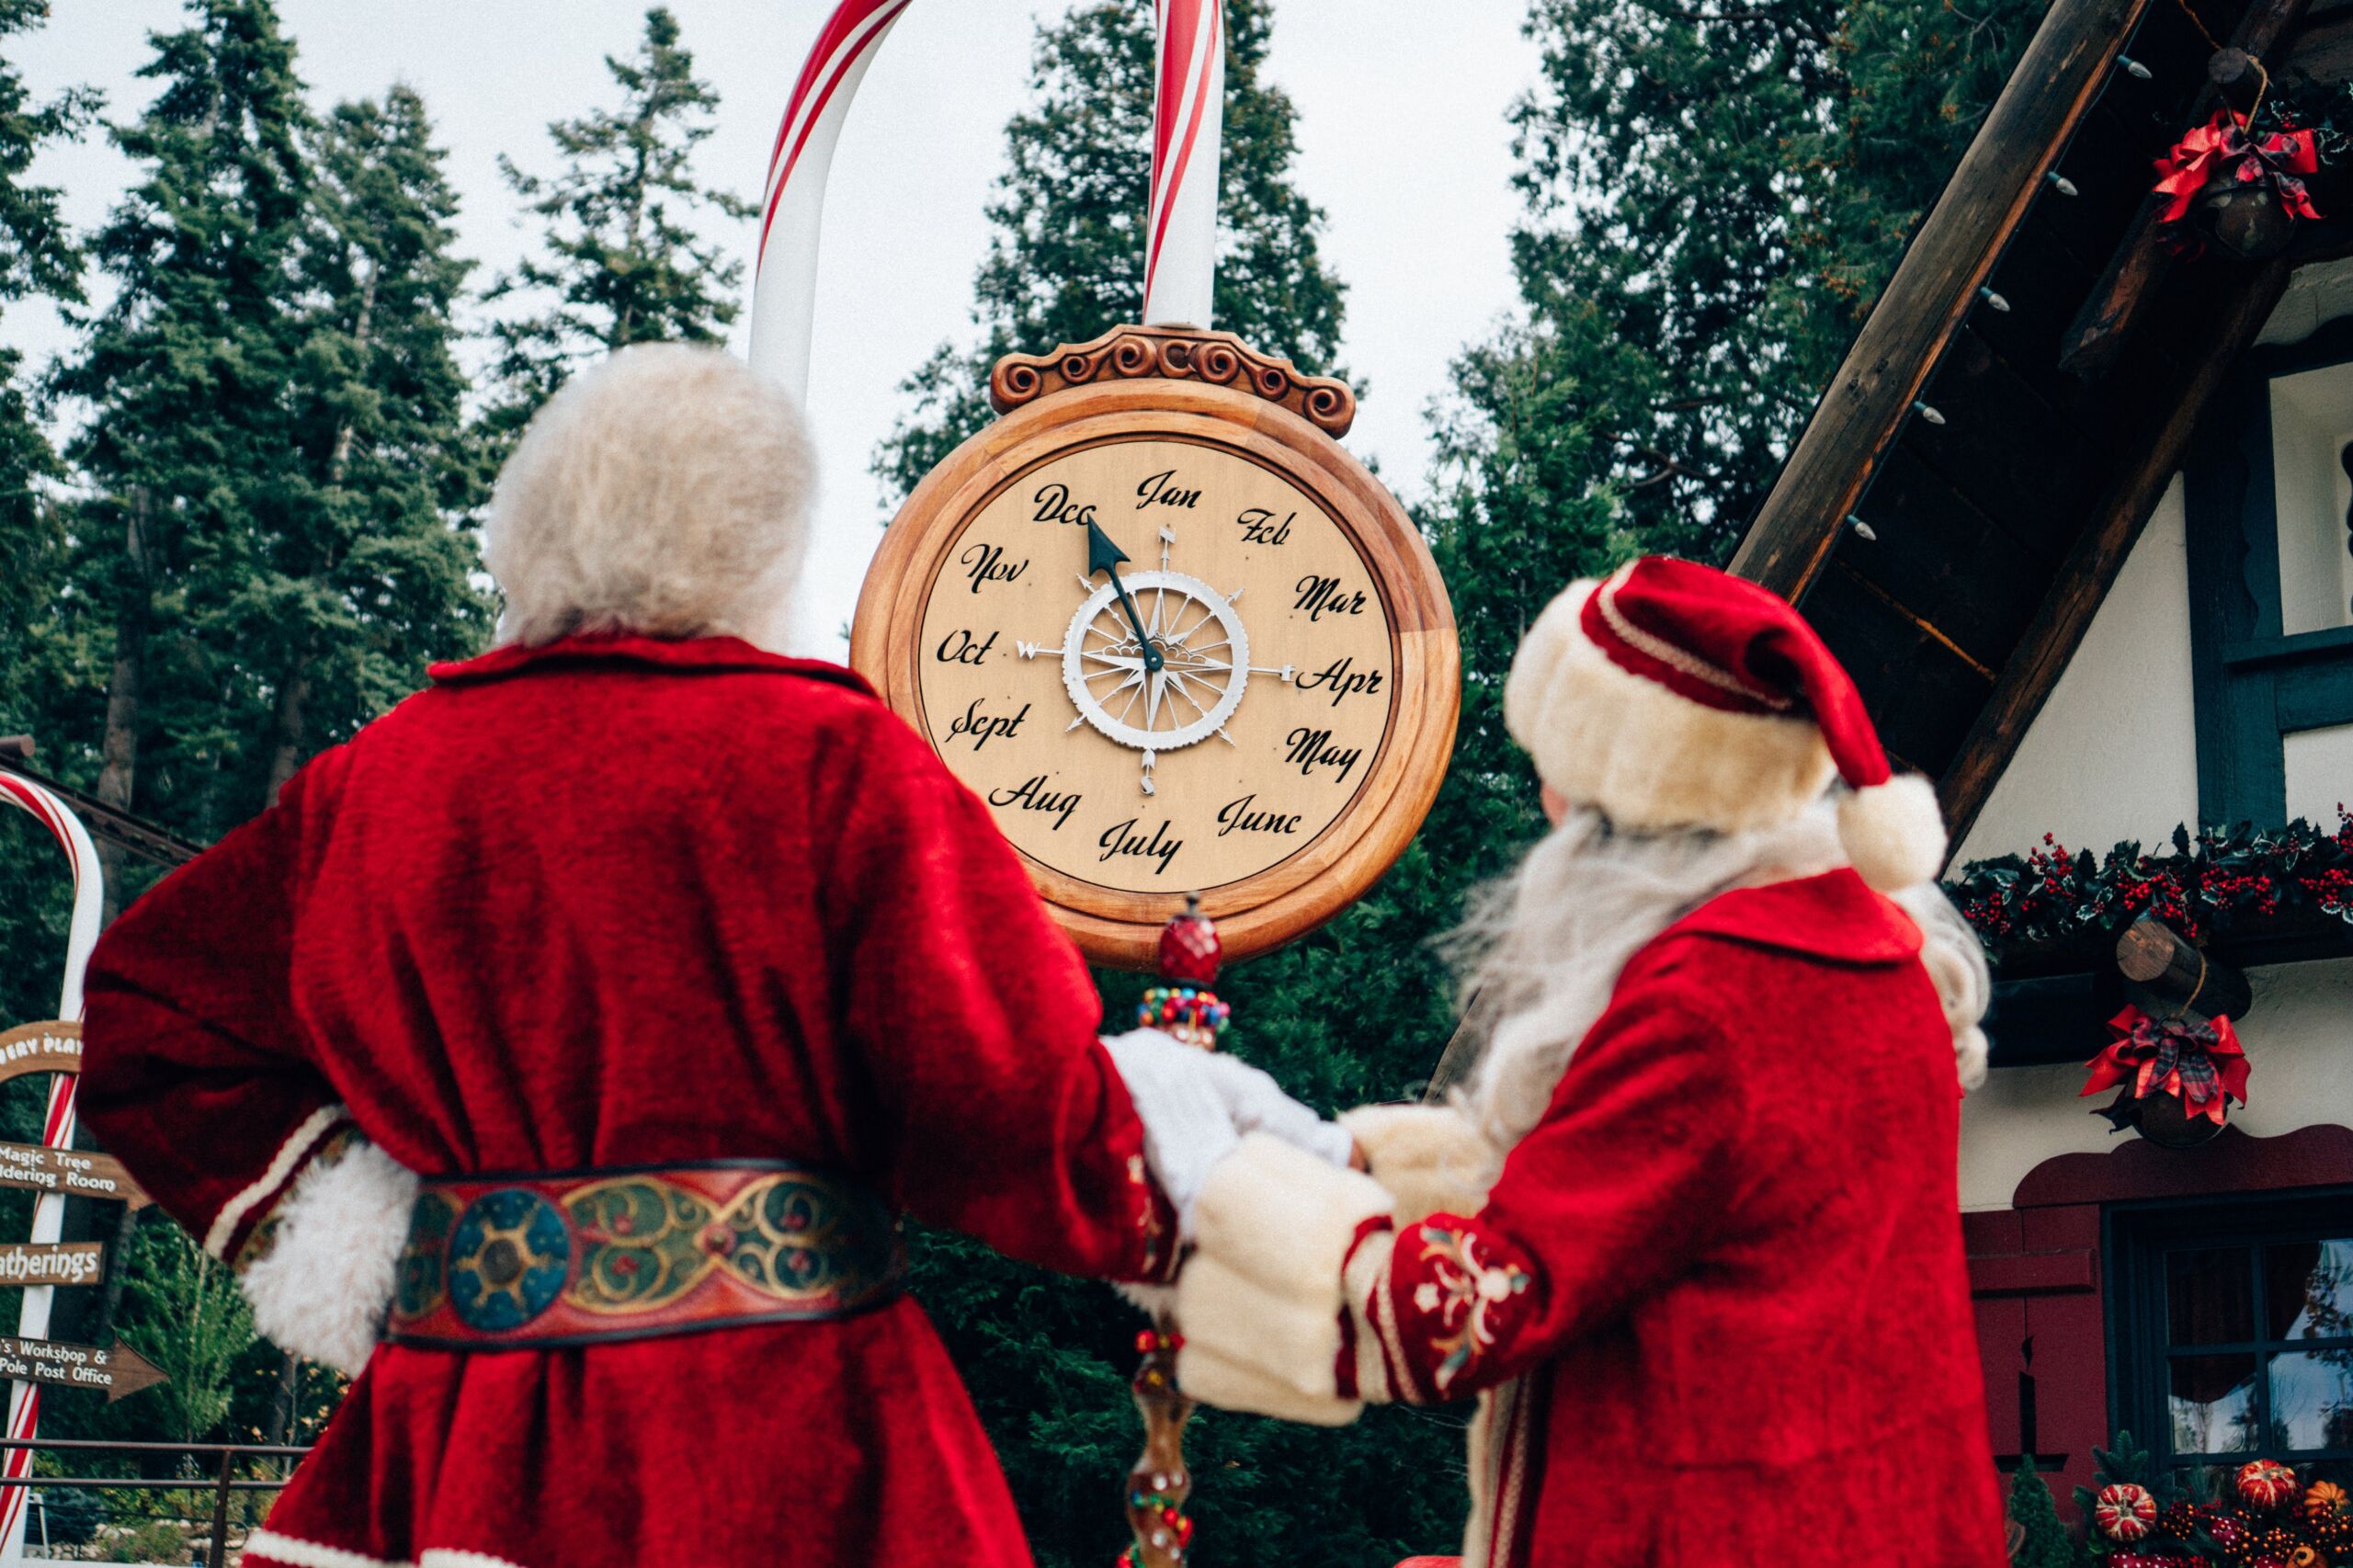 Santa's Village: A Nostalgic Christmas in the Woods